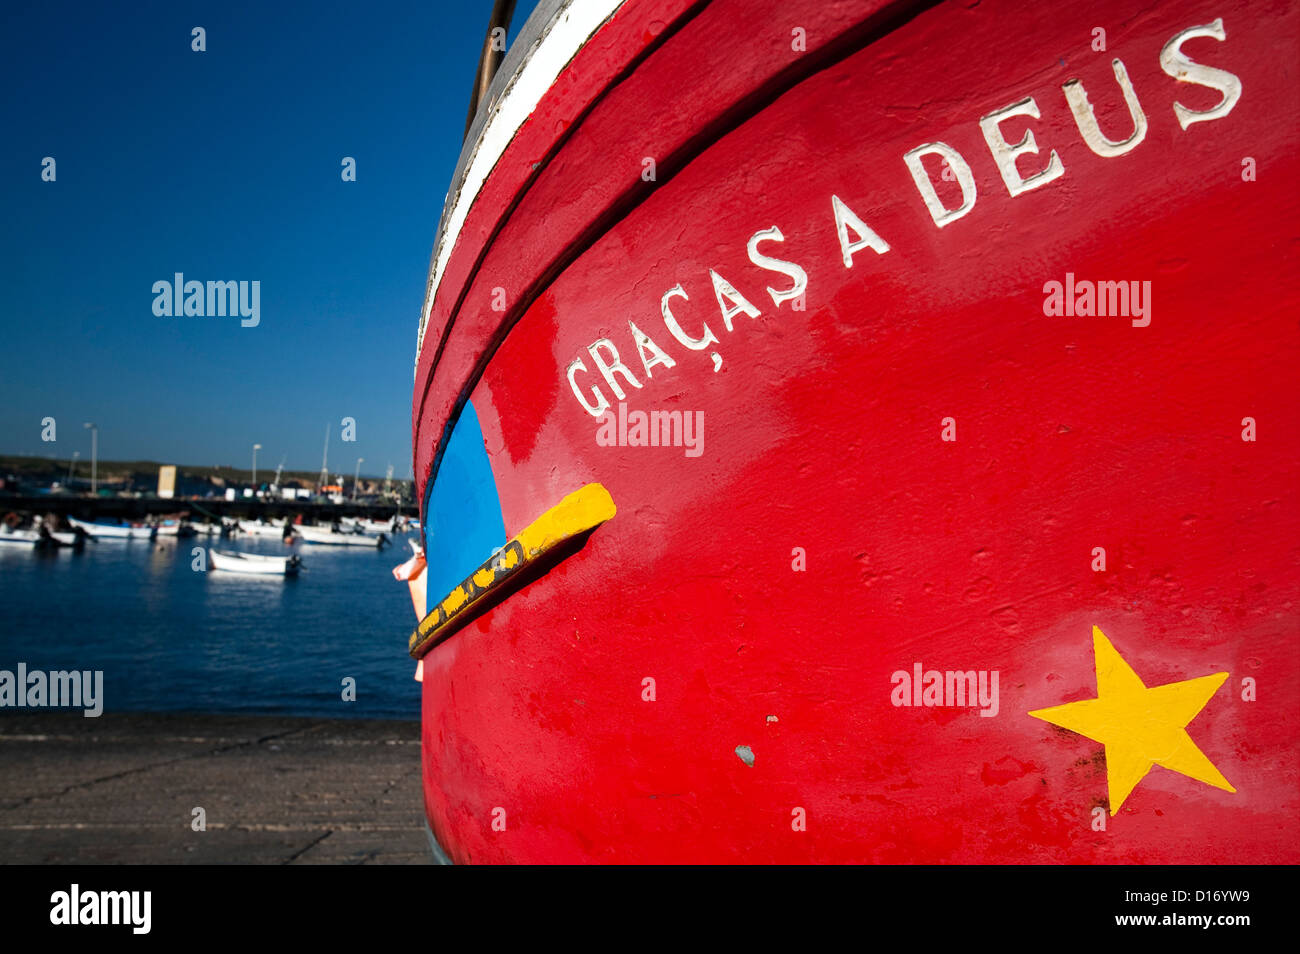 Sagres, Portugal, the hull of a ship Stock Photo